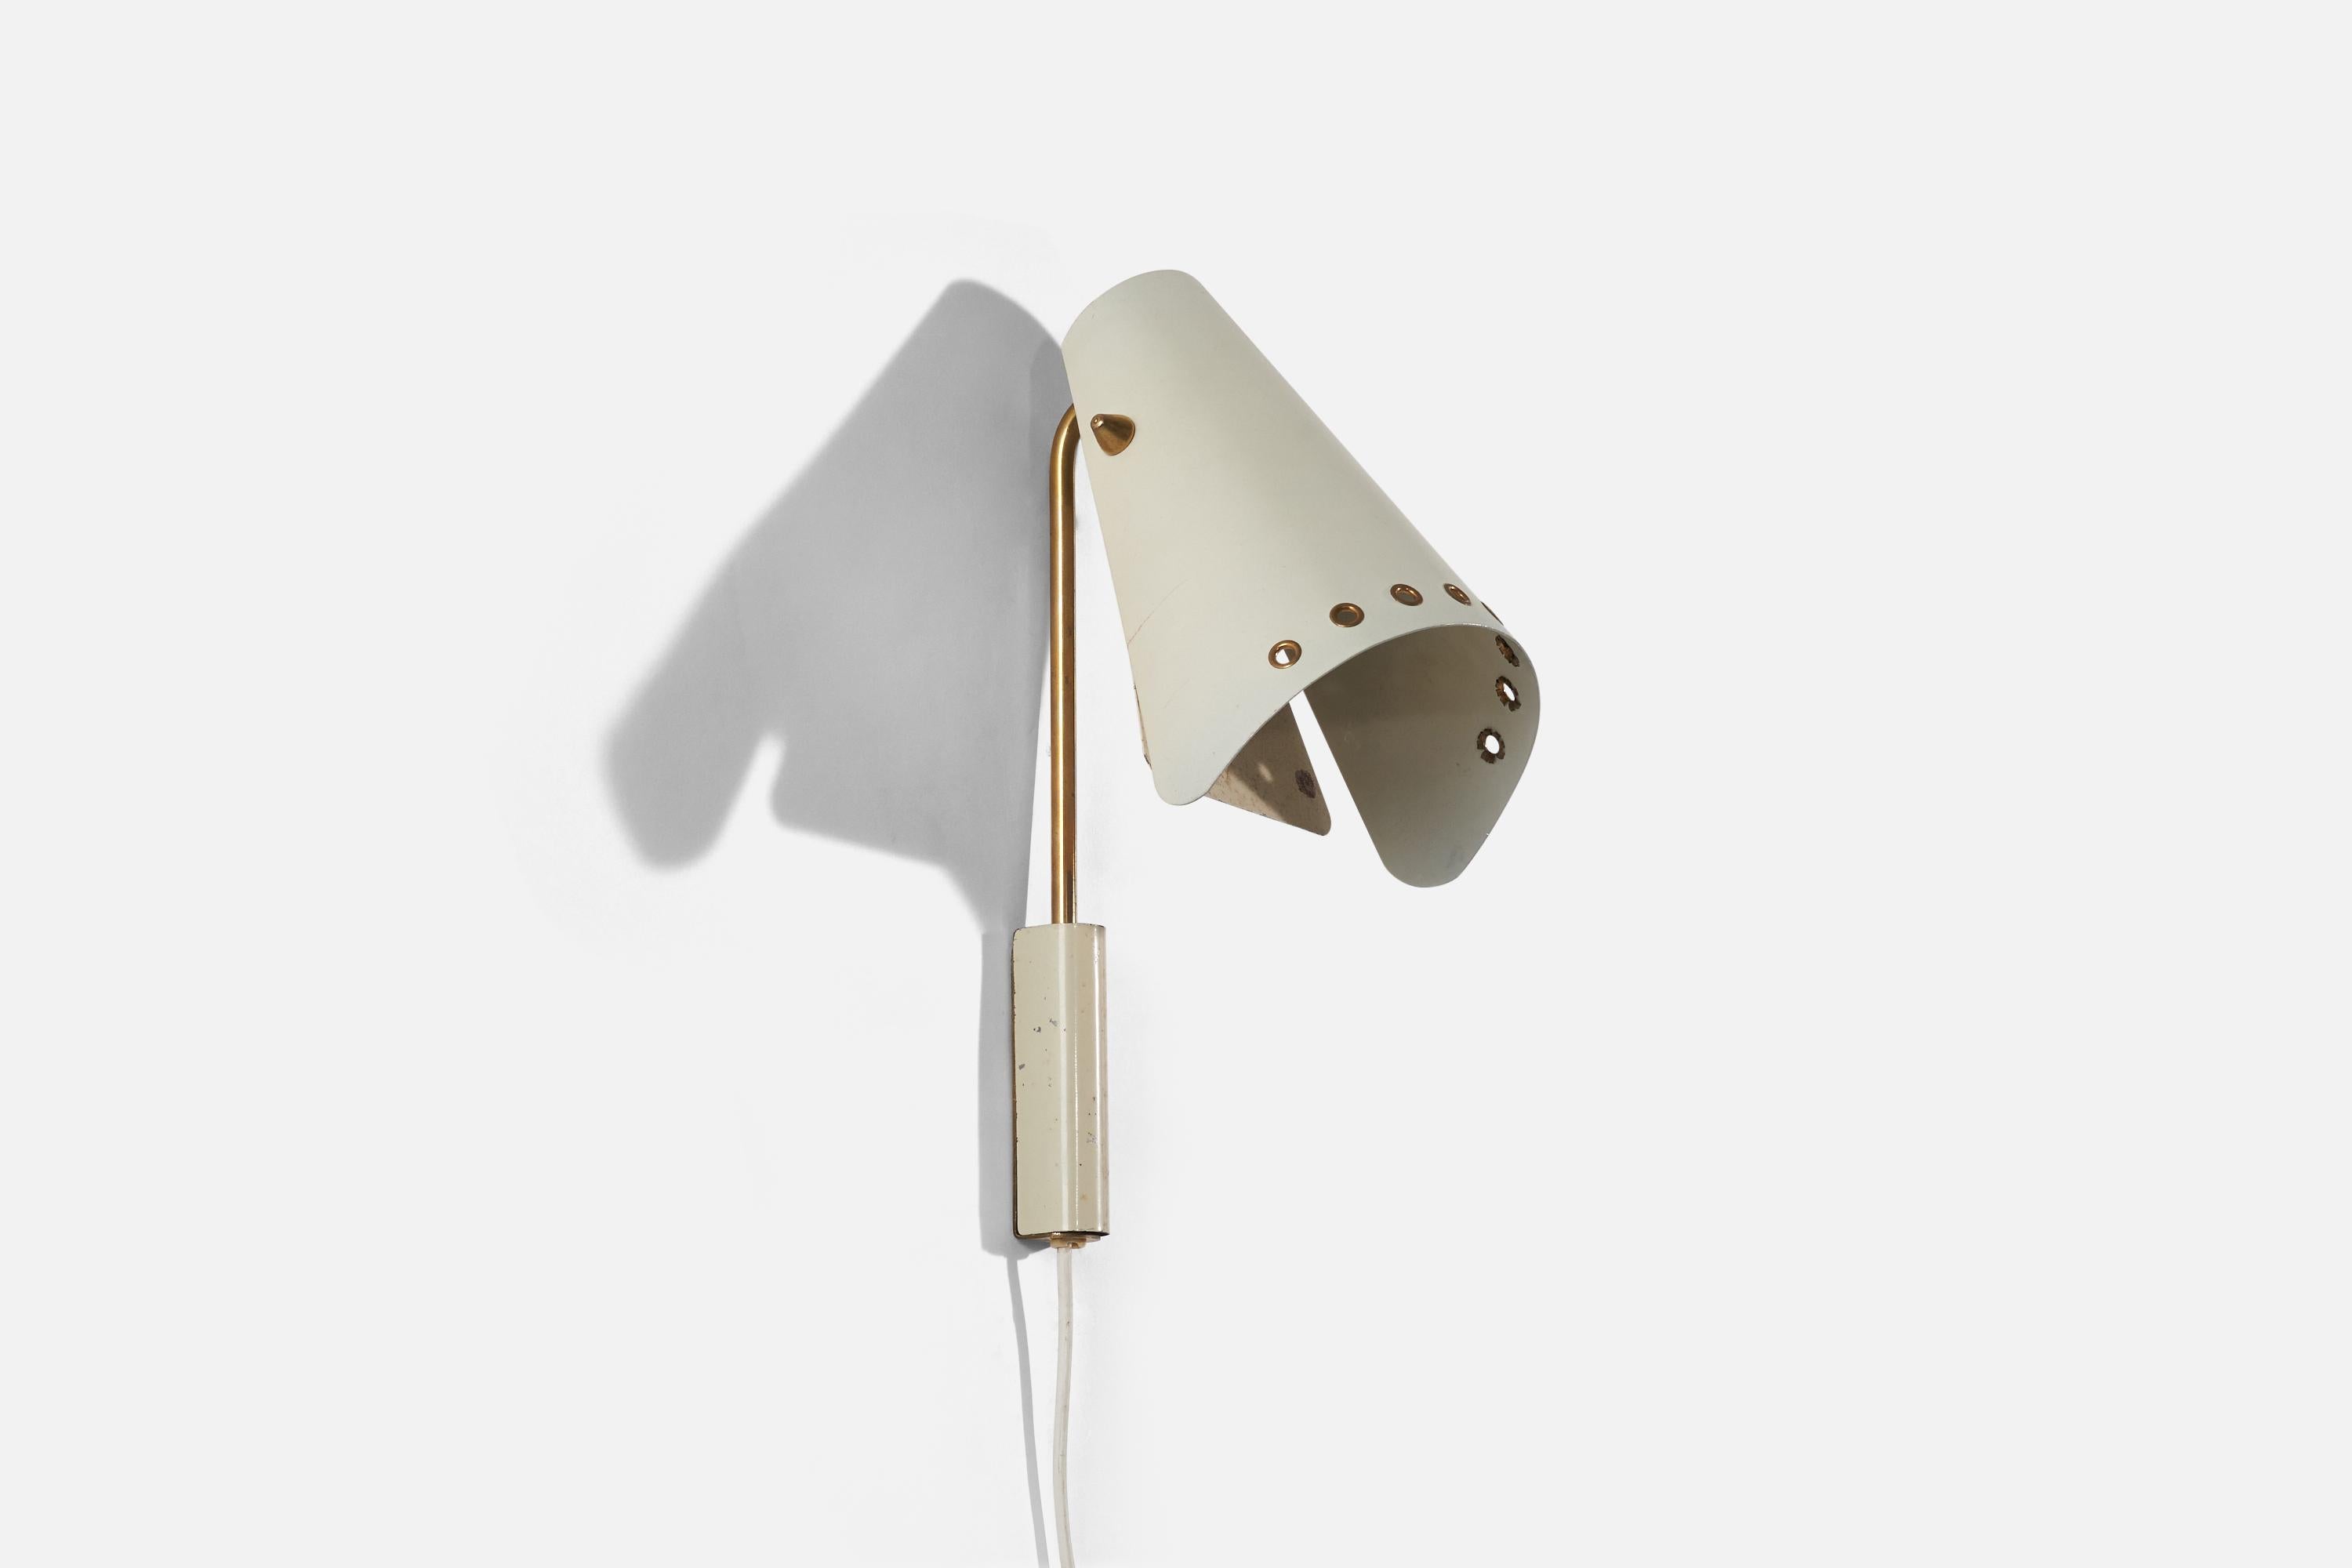 A brass and white lacquered metal sconce designed and produced in Sweden, c. 1950s.

Variable dimensions, measured as illustrated in the first image. 
Dimensions of back plate (inches) : 4.15 x 0.98 x 1.04 (H x W x D).